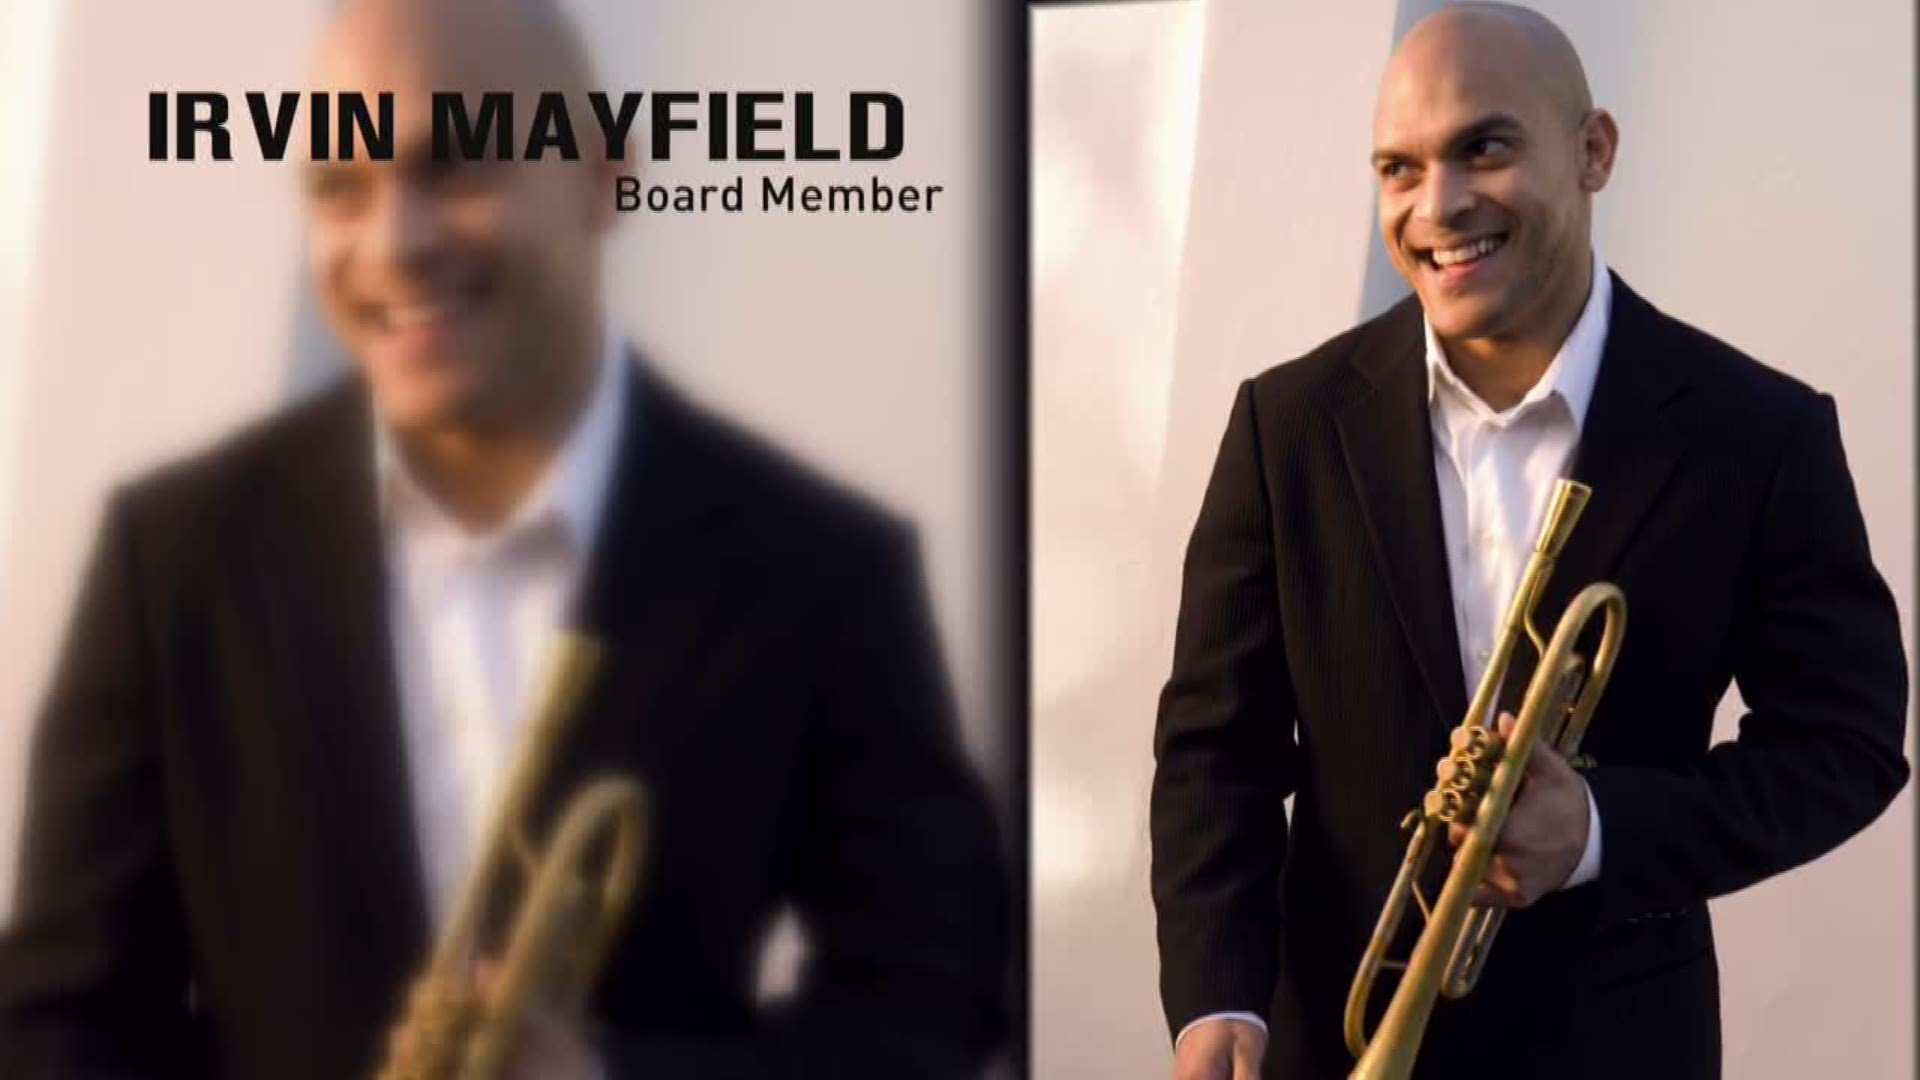 David Hammer reports on possible additional problems for Irvin Mayfield and the New Orleans Jazz Orchestra.